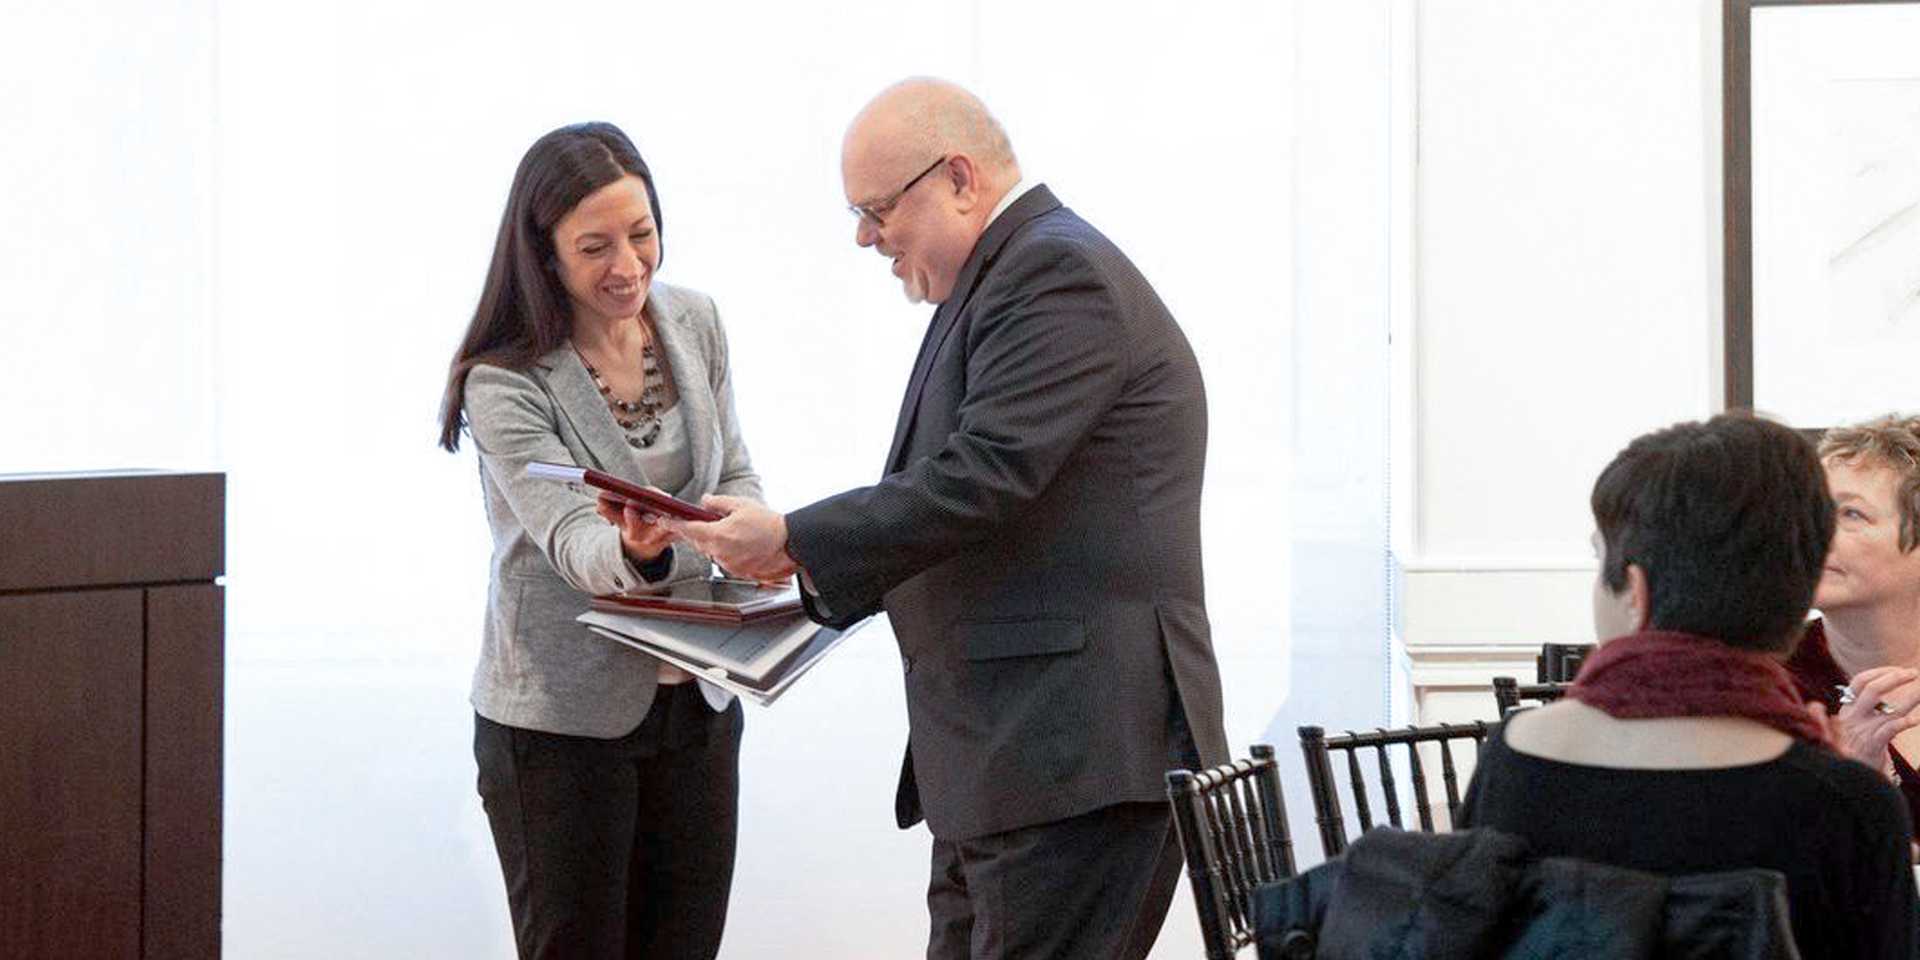 Man in suit accepting award from a woman in a gray blazer